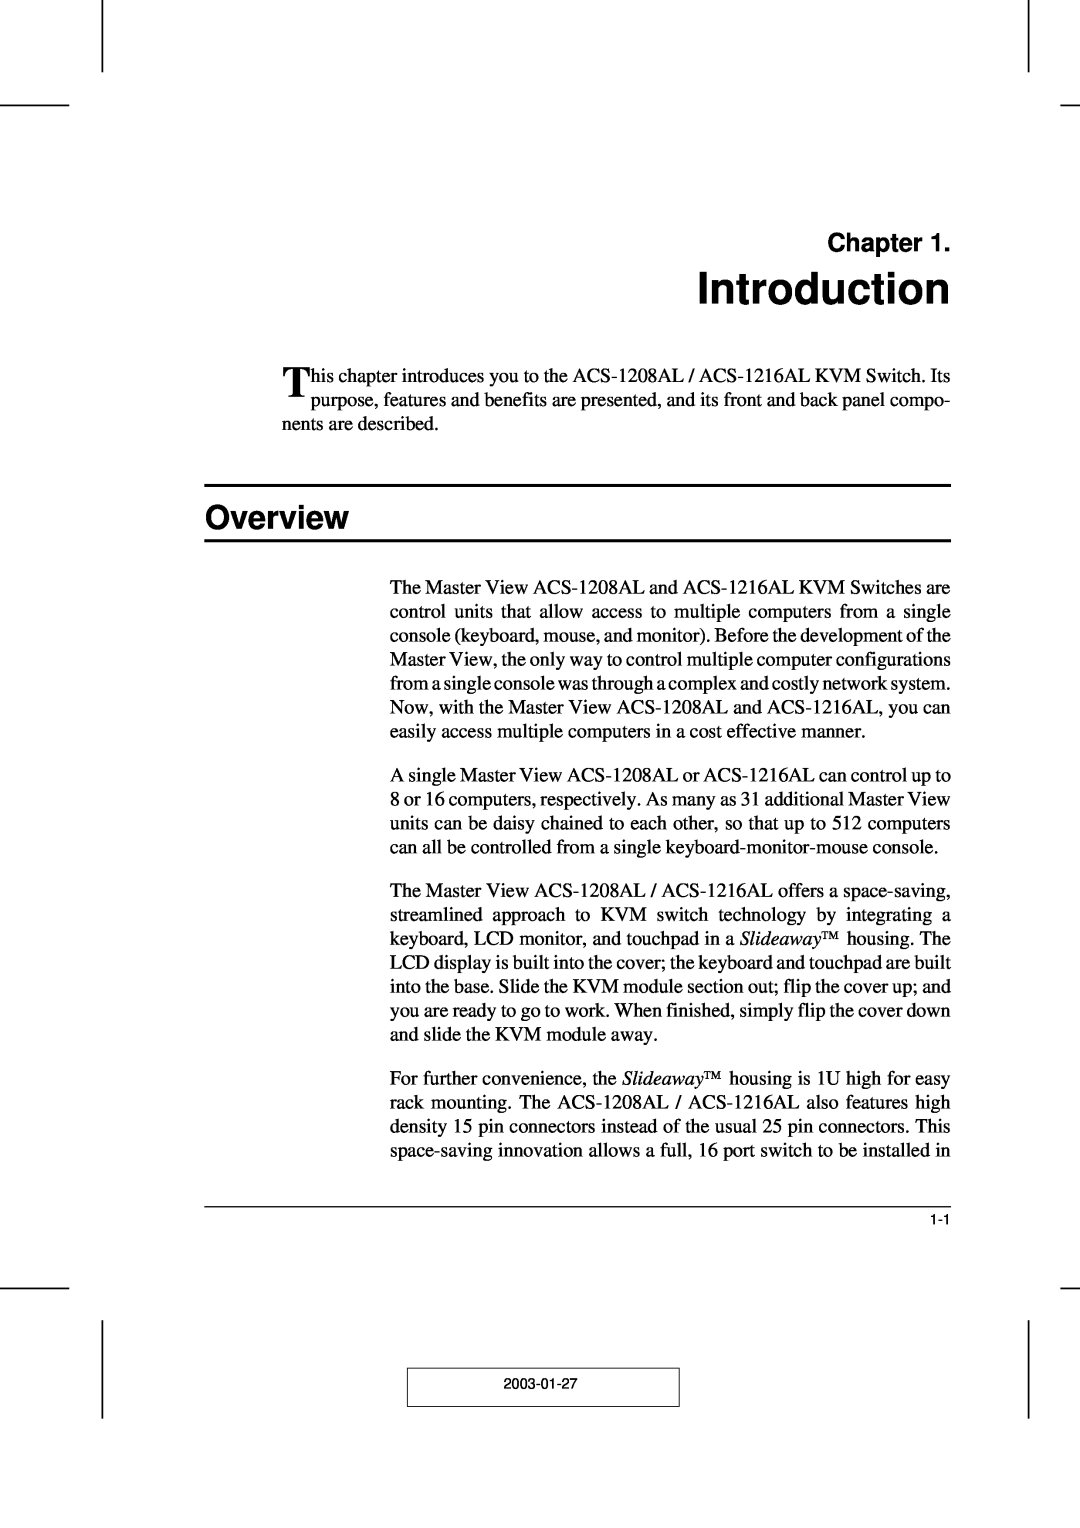 ATEN Technology ACS-1216AL, ACS-1208AL user manual Introduction, Overview, Chapter 